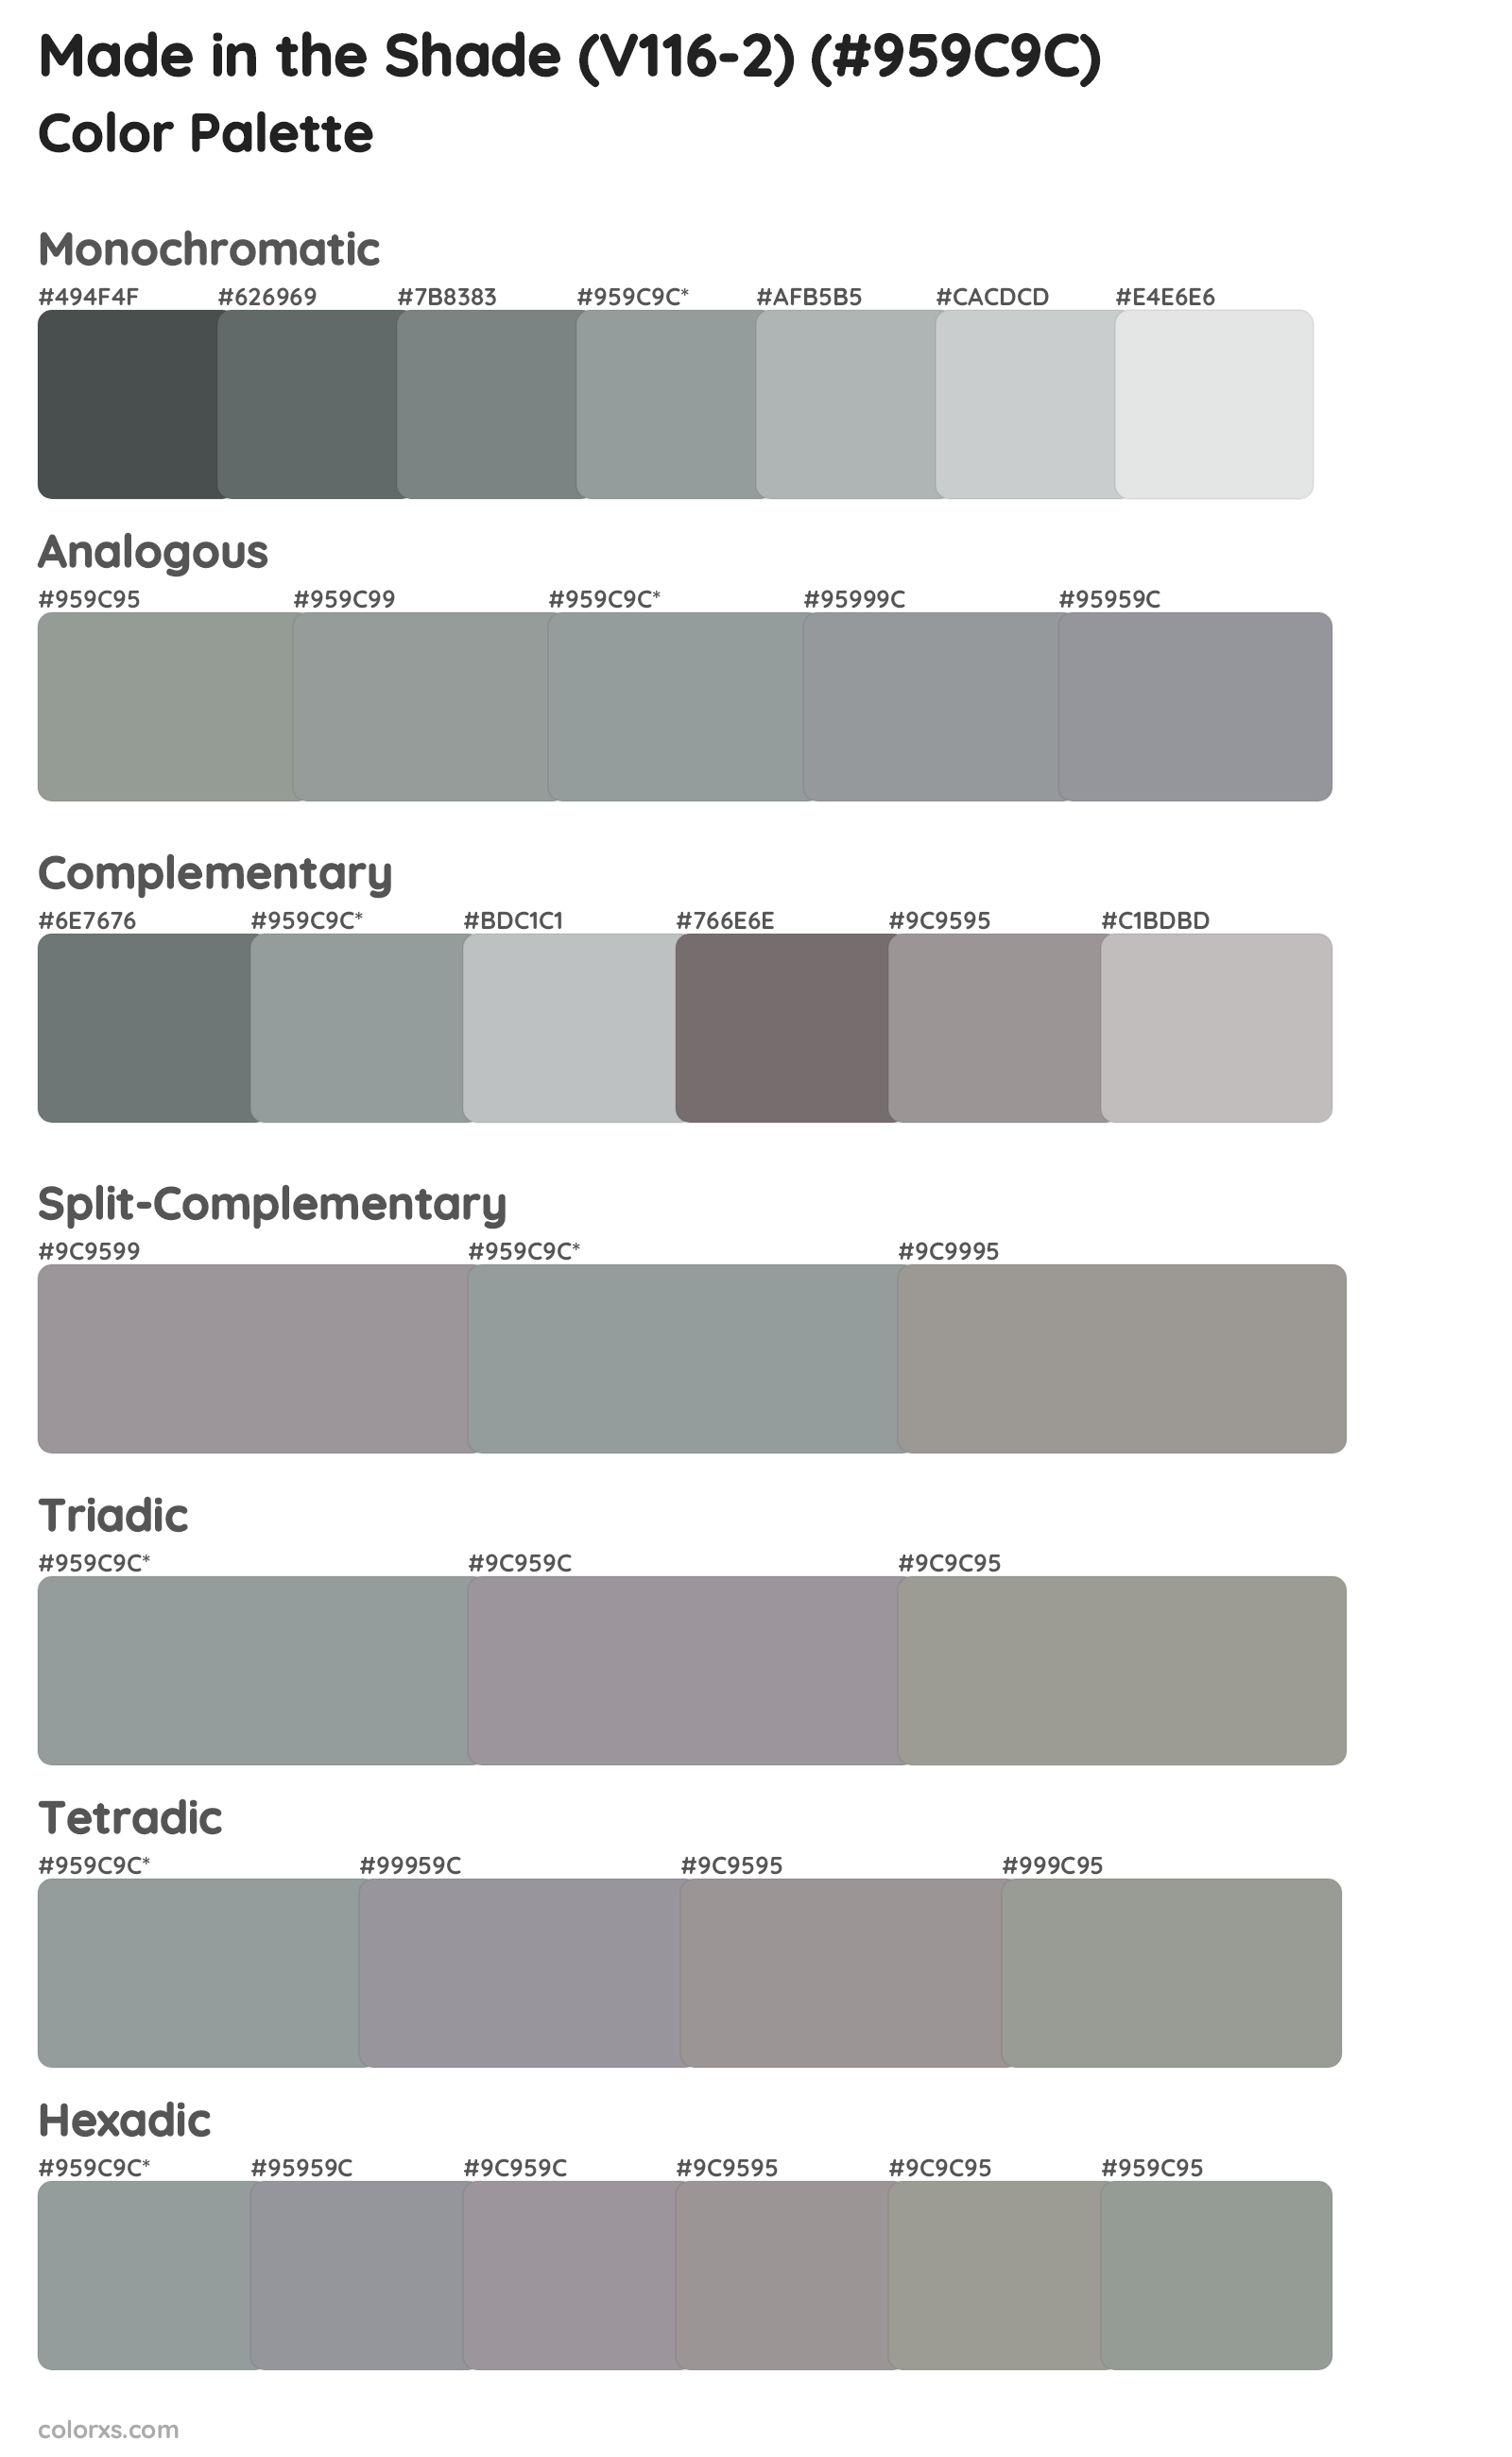 Made in the Shade (V116-2) Color Scheme Palettes